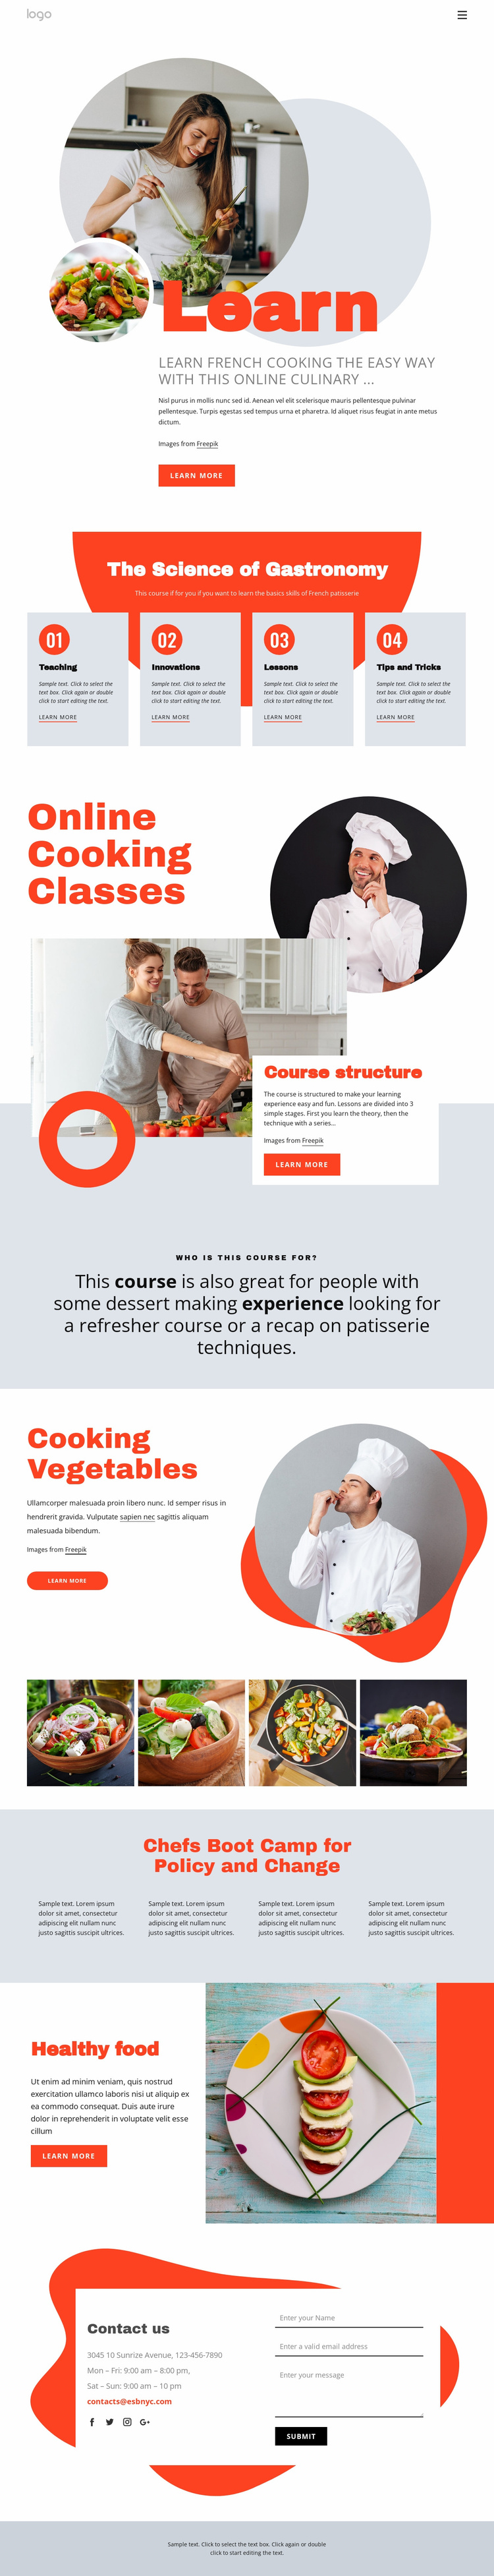 Learn cooking the easy way Website Template